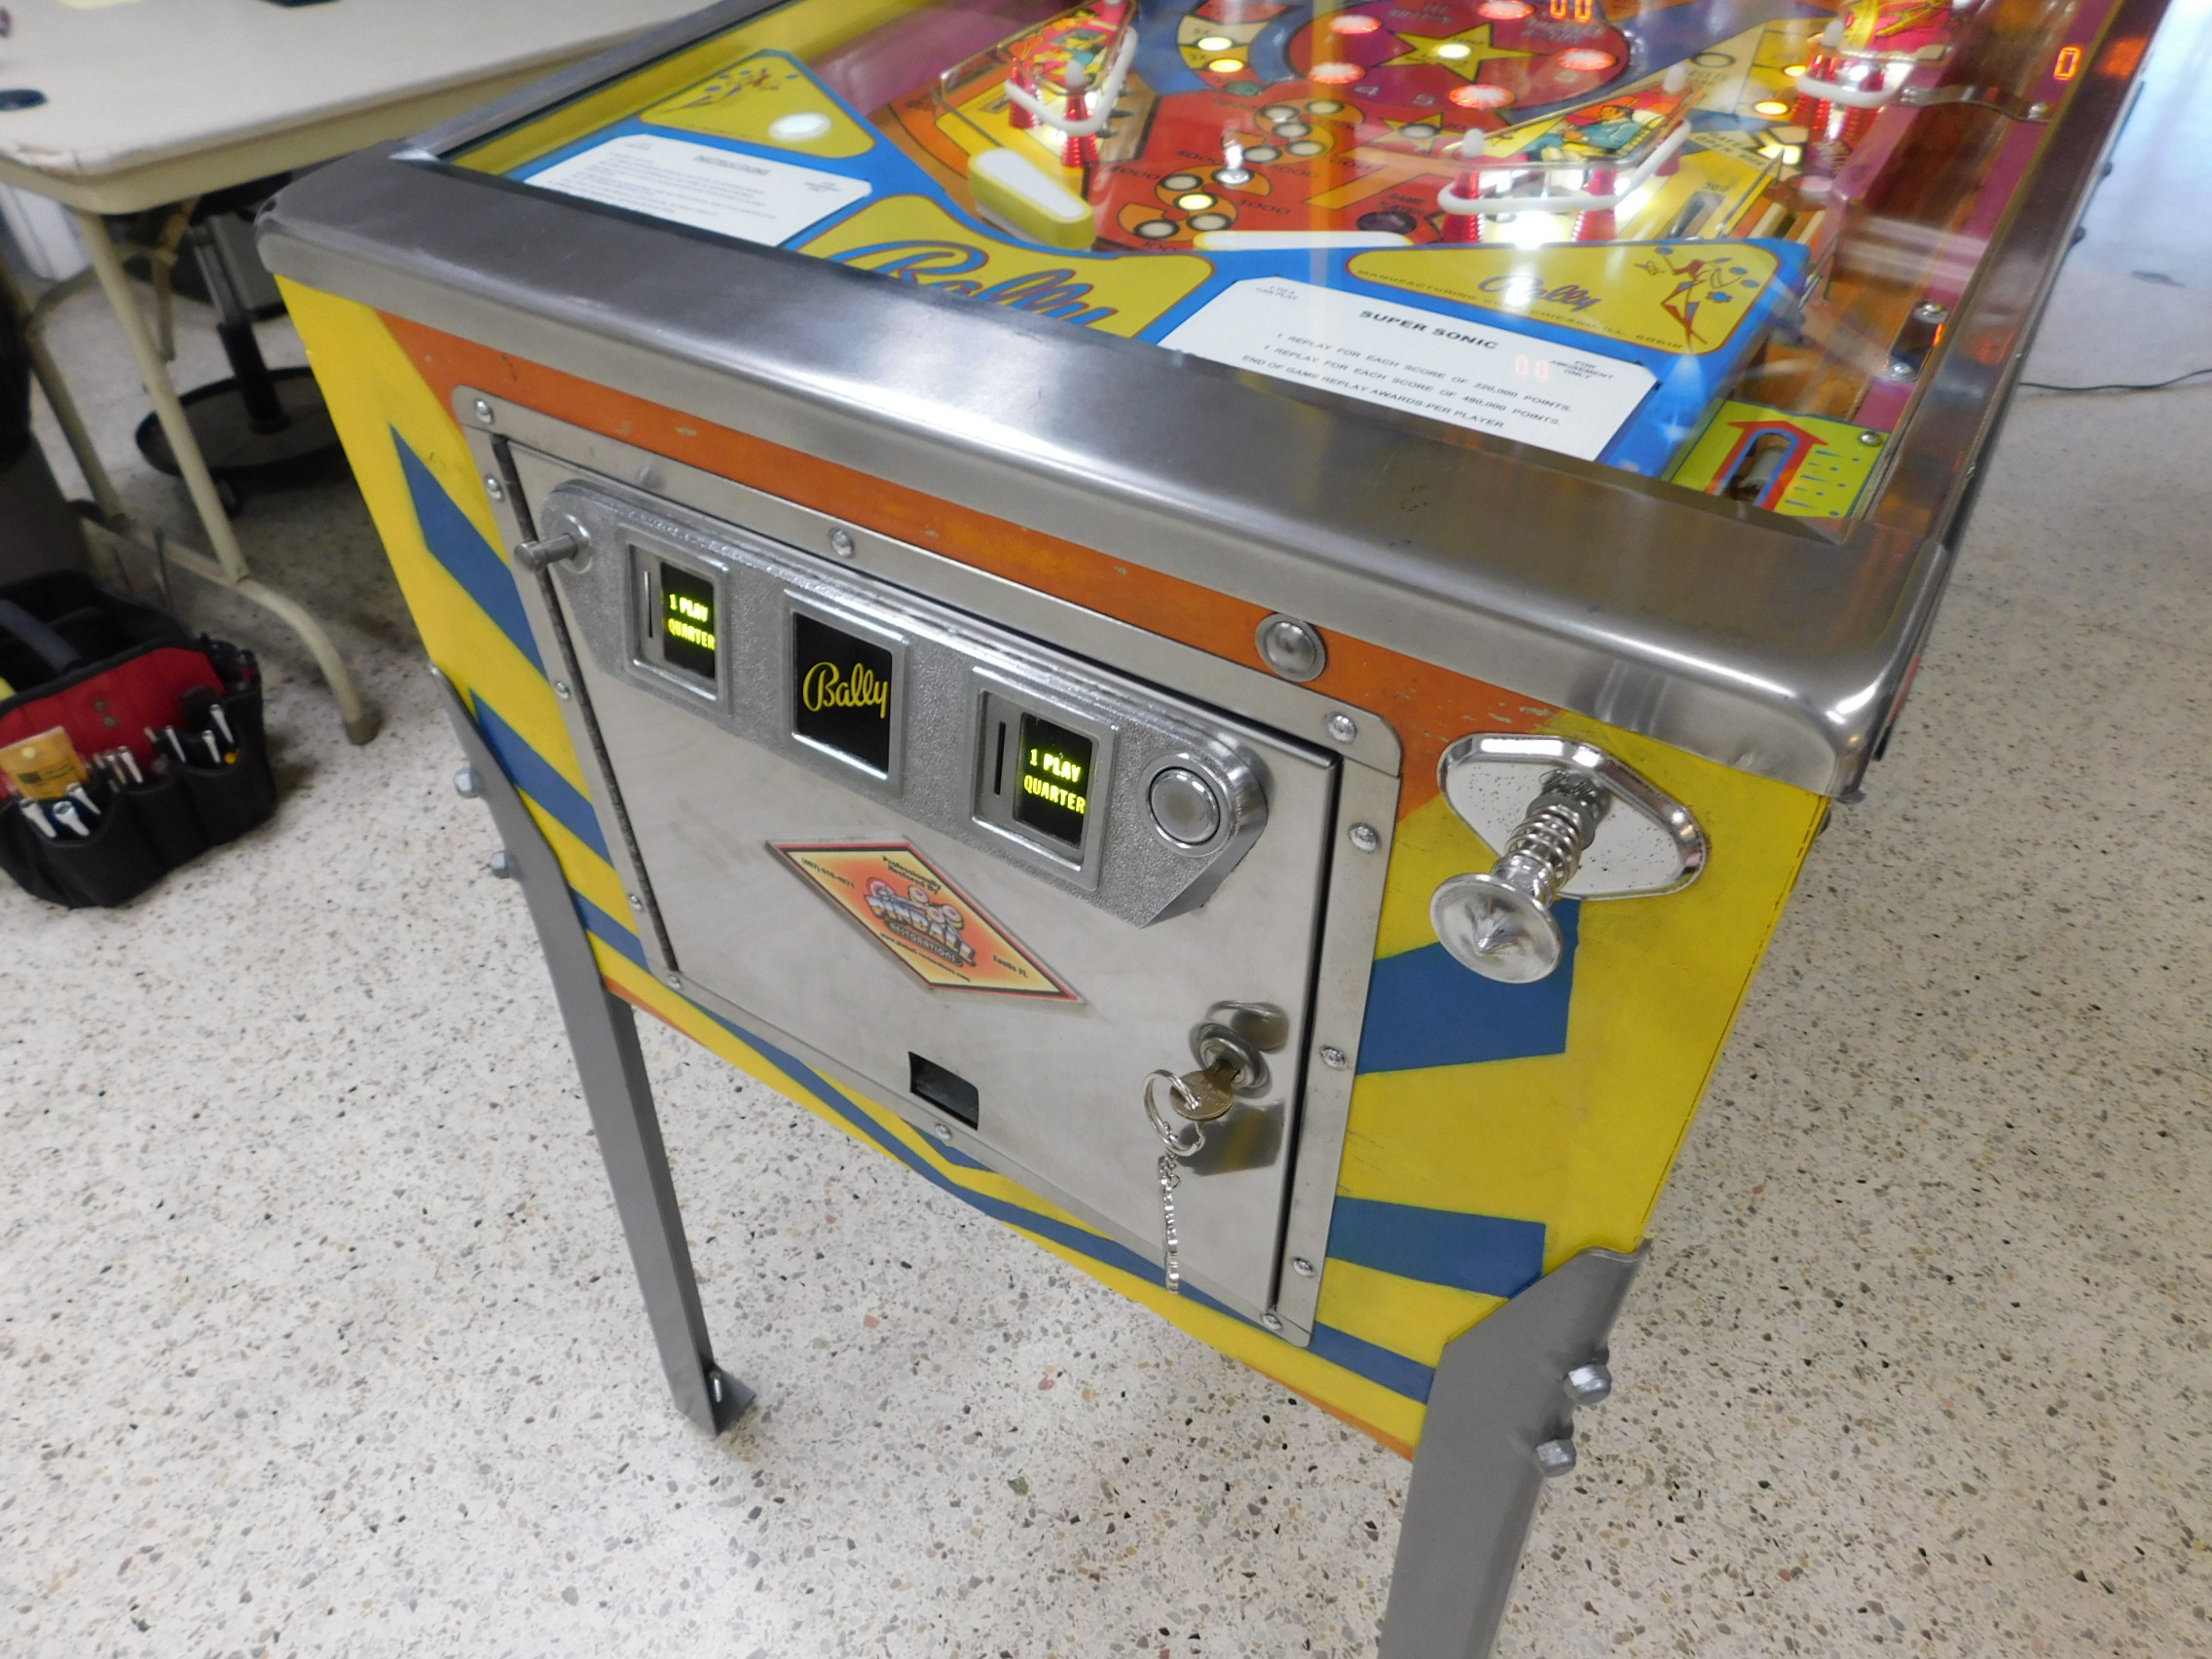 bally supersonic pinball machine for sale